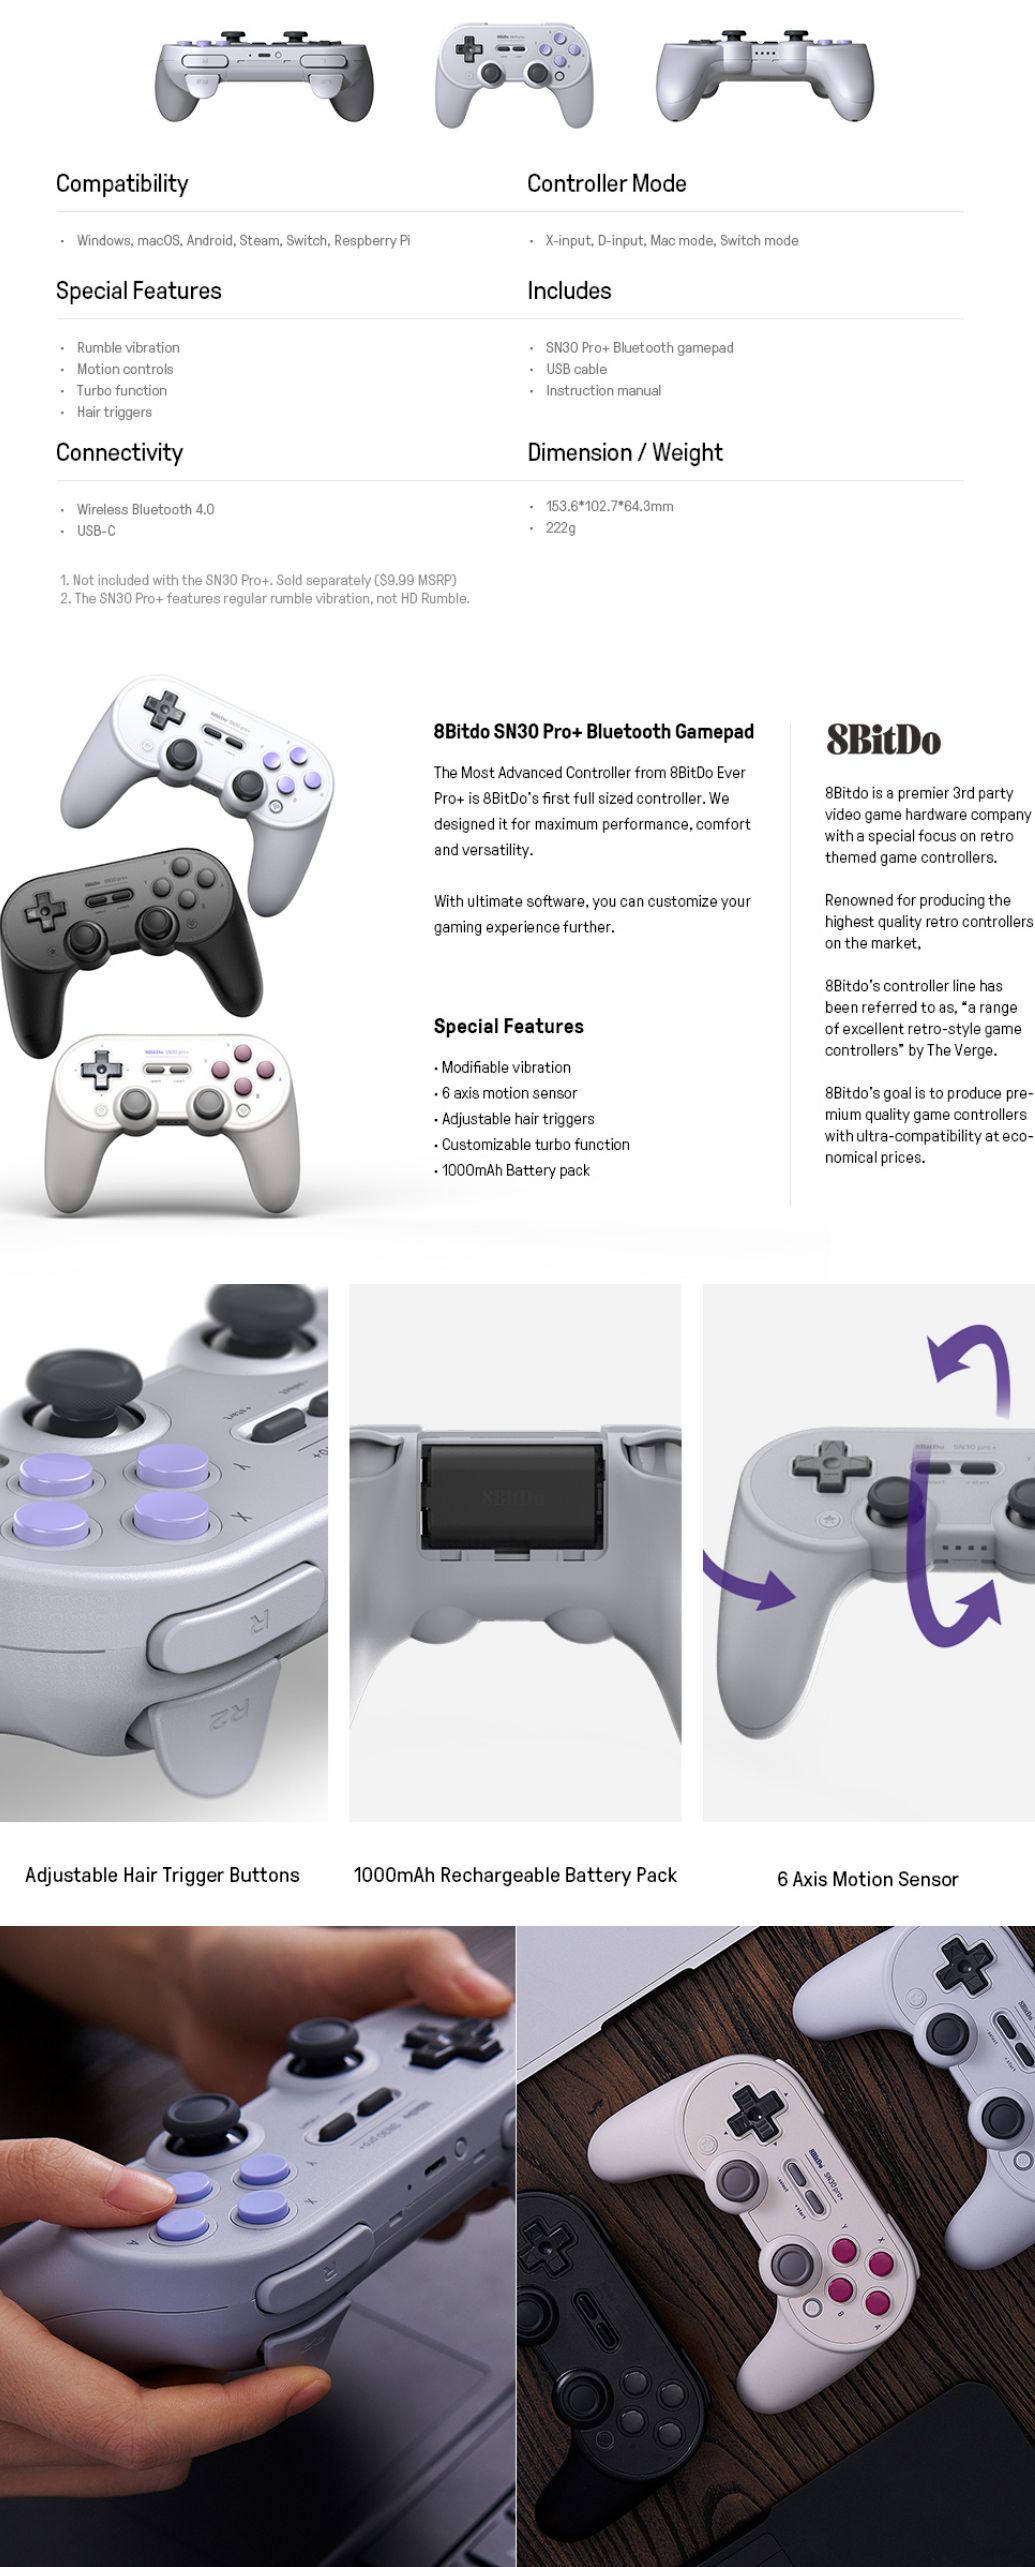 8Bitdo-SN30PRO-bluetooth-Vibration-Gamepad-Game-Controller-for-Windows-Android-for-iOS-for-Nintendo--1571006